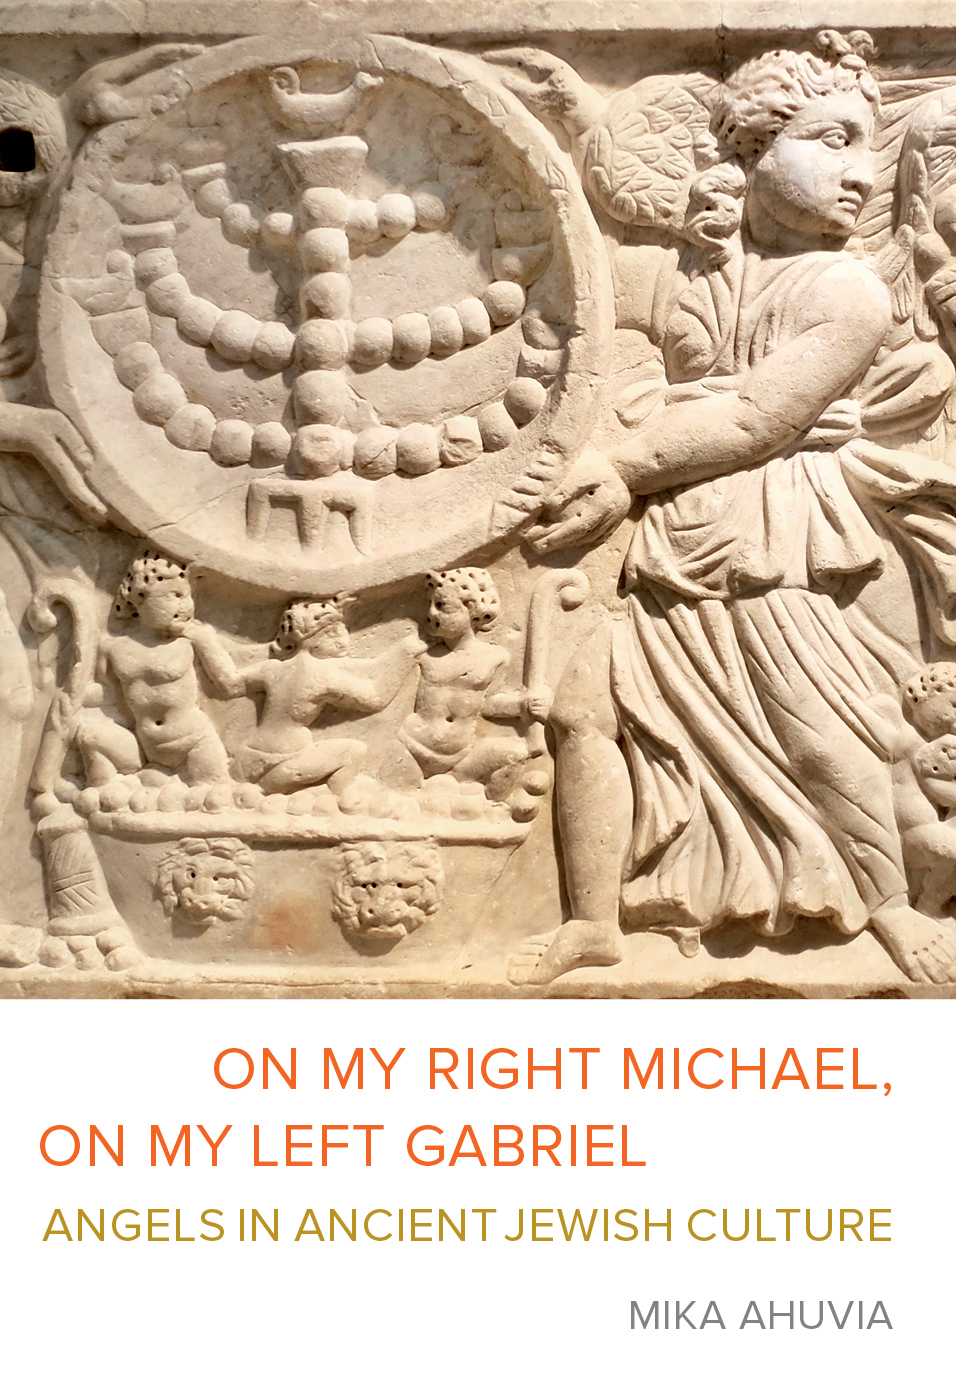 Book Cover of On My Right Michael, On My Left Gabriel showing Roman era sarcophagus relief of menorah framed by winged women